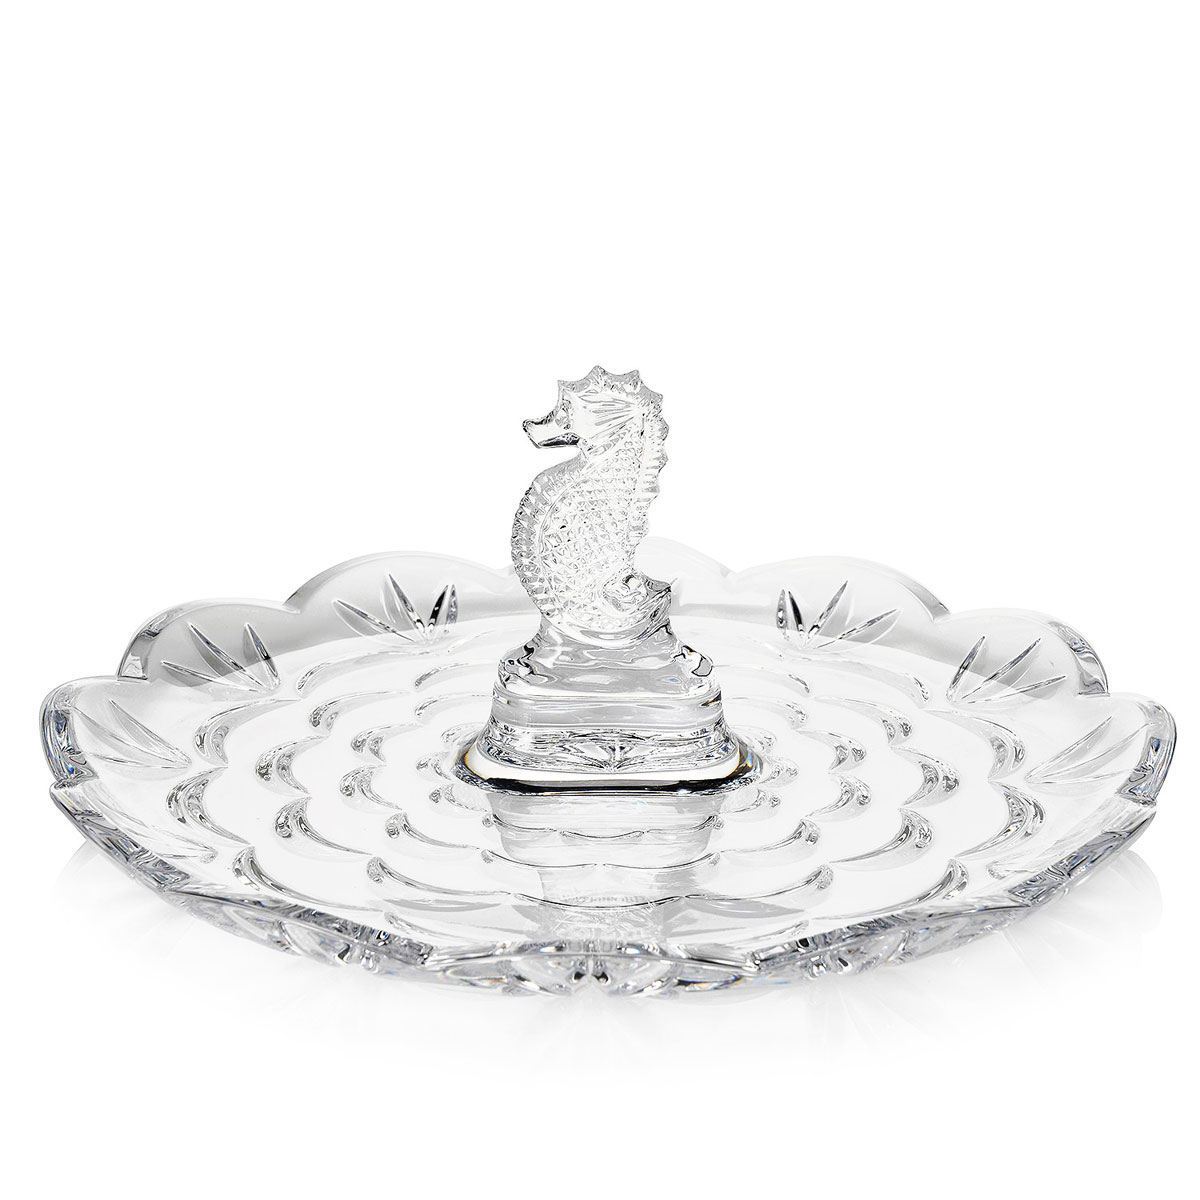 Waterford Crystal Seahorse 9" Server Tray